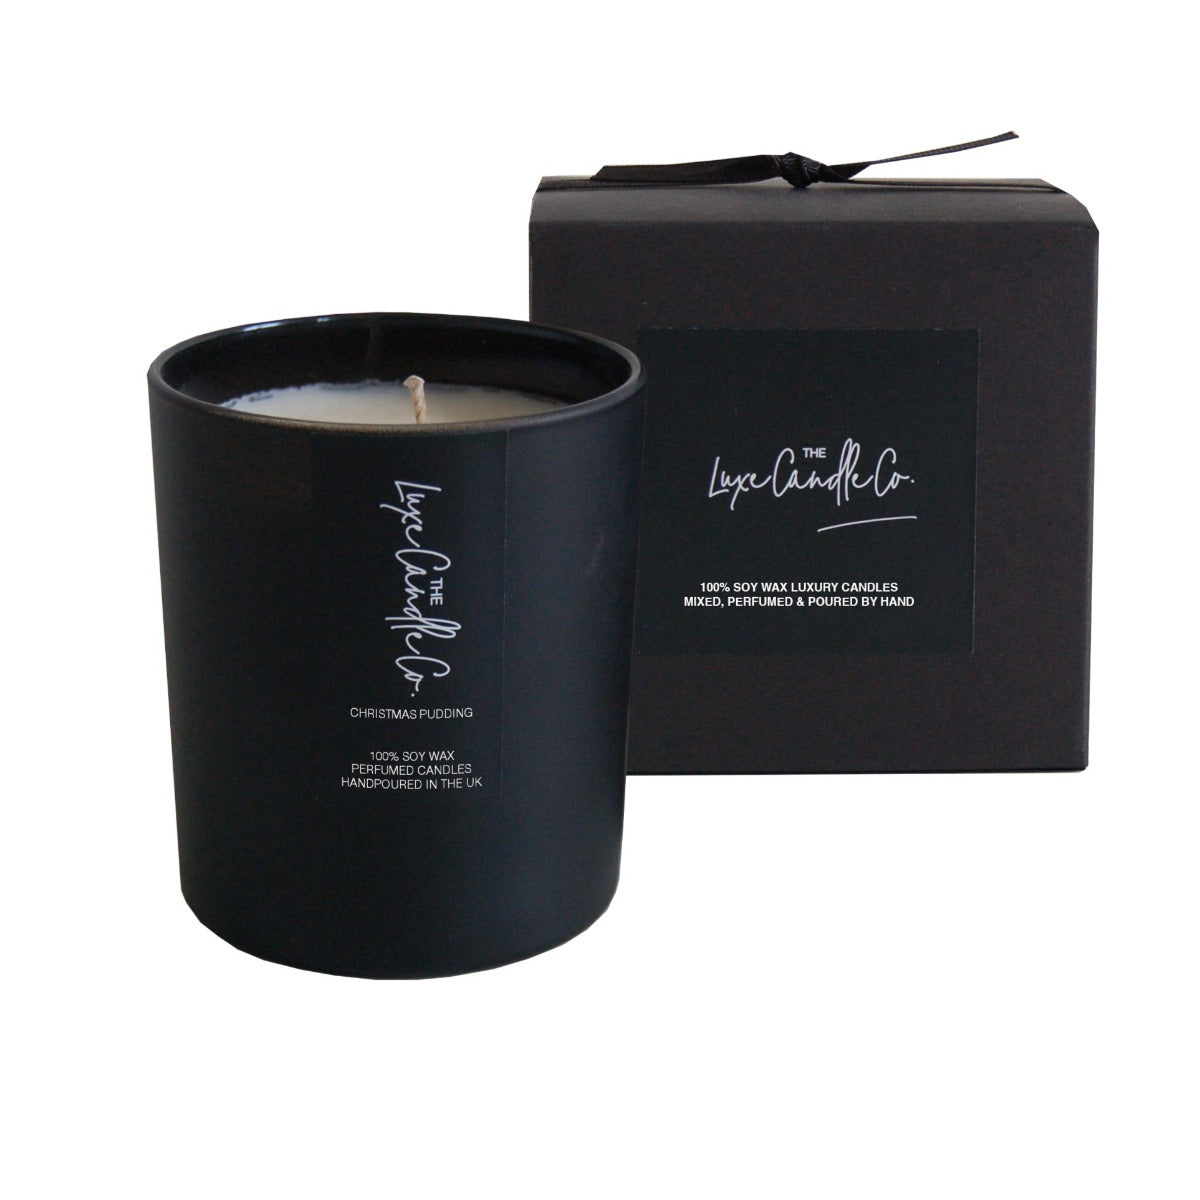 Black Christmas Pudding scented soy wax candle | by The Luxe Candle Co